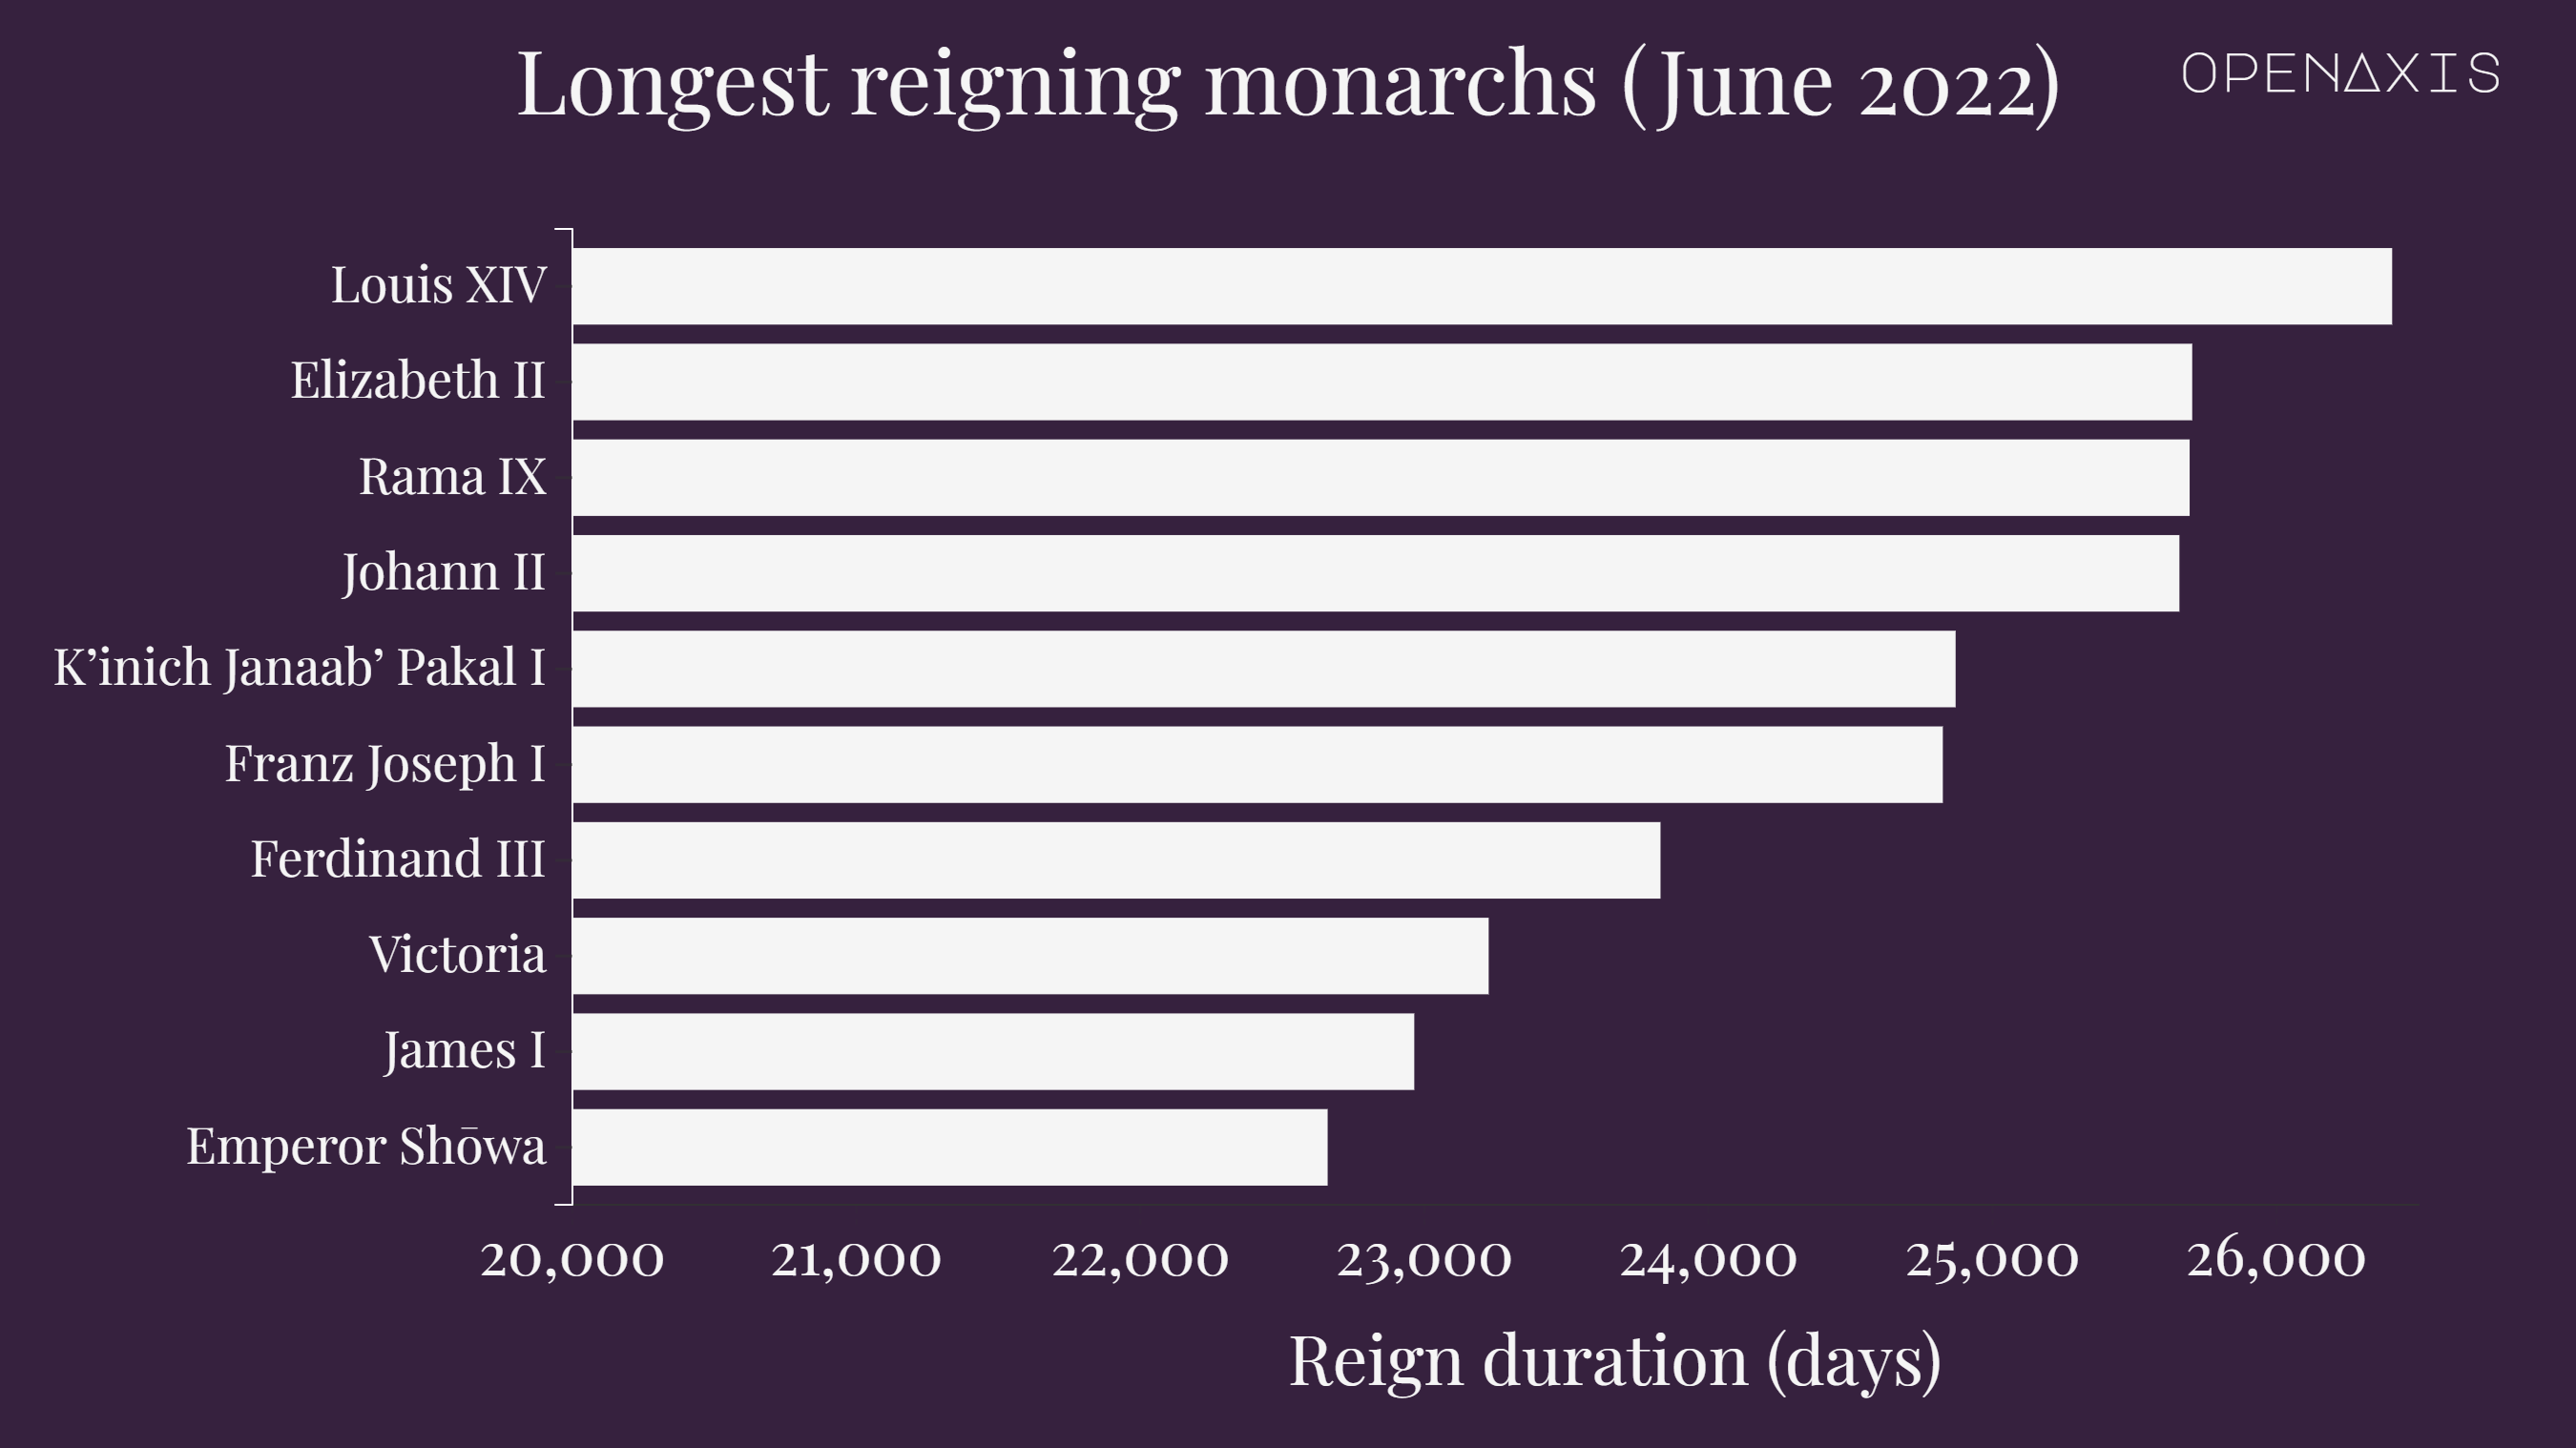 <p>This is a list of the longest-reigning monarchs of all time, detailing the monarchs and lifelong leaders who have reigned the longest in world history, ranked by length of reign.</p><p><br /></p><p>Twenty-five longest-reigning monarchs of states that were internationally recognized as sovereign for most or all of their reign are below.</p><p><br /></p><p>Queen Elizabeth II of the UK rose to the <a href="https://app.openaxis.com/search?q=%232" target="_blank">#2</a> spot in June 2022, surpassing King Rama IX of Thailand, with a current reign of 70 years and 135 days.</p><p><br /></p><p><span data-index="0" data-denotation-char data-id="0" data-value="&lt;a href=&quot;/search?q=%23monarchy&quot; target=_self&gt;#monarchy" data-link="/search?q=%23monarchy">﻿<span contenteditable="false"><span></span><a href="/search?q=%23monarchy" target="_self">#monarchy</a></span>﻿</span> <span data-index="0" data-denotation-char data-id="0" data-value="&lt;a href=&quot;/search?q=%23headofstate&quot; target=_self&gt;#headofstate" data-link="/search?q=%23headofstate">﻿<span contenteditable="false"><span></span><a href="/search?q=%23headofstate" target="_self">#headofstate</a></span>﻿</span> <span data-index="0" data-denotation-char data-id="0" data-value="&lt;a href=&quot;/search?q=%23government&quot; target=_self&gt;#government" data-link="/search?q=%23government">﻿<span contenteditable="false"><span></span><a href="/search?q=%23government" target="_self">#government</a></span>﻿</span></p><p><br /></p><p>Source: <a href="/data/3853" target="_blank">Time, BBC, Guinness World Records, Wikipedia</a></p><p><br /></p>